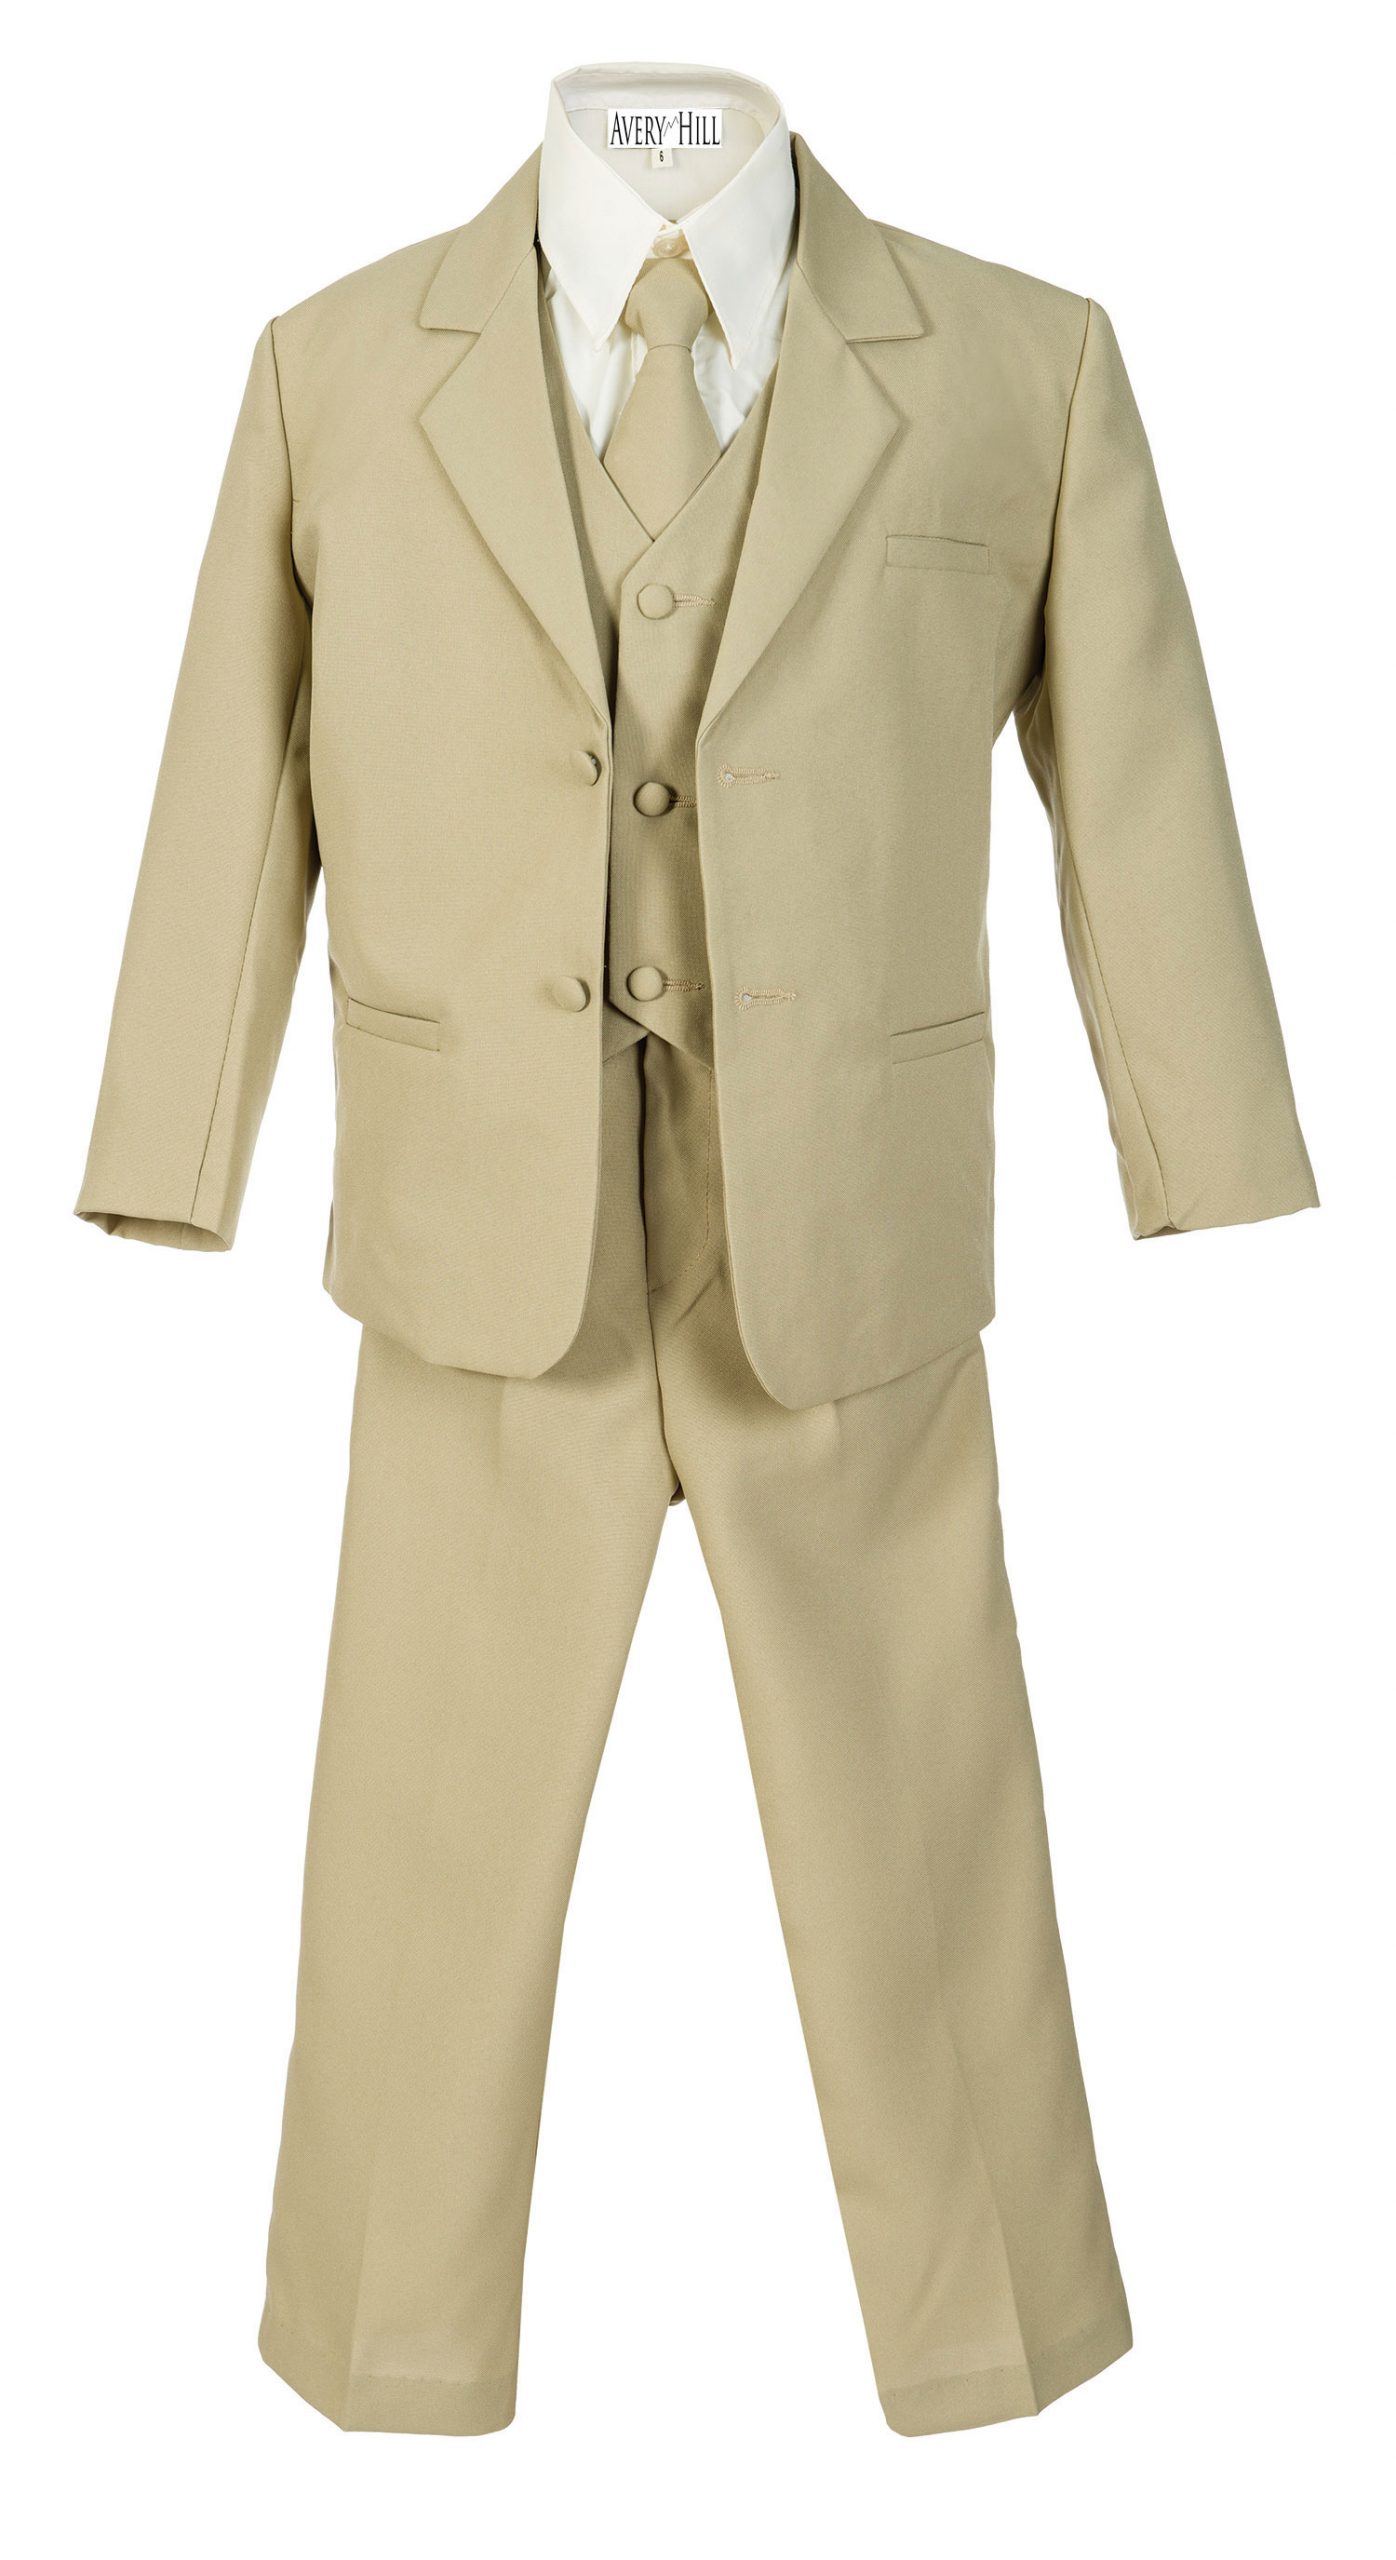 Avery Hill Boys Formal 5 Piece Suit with Shirt and Vest Khaki - 18